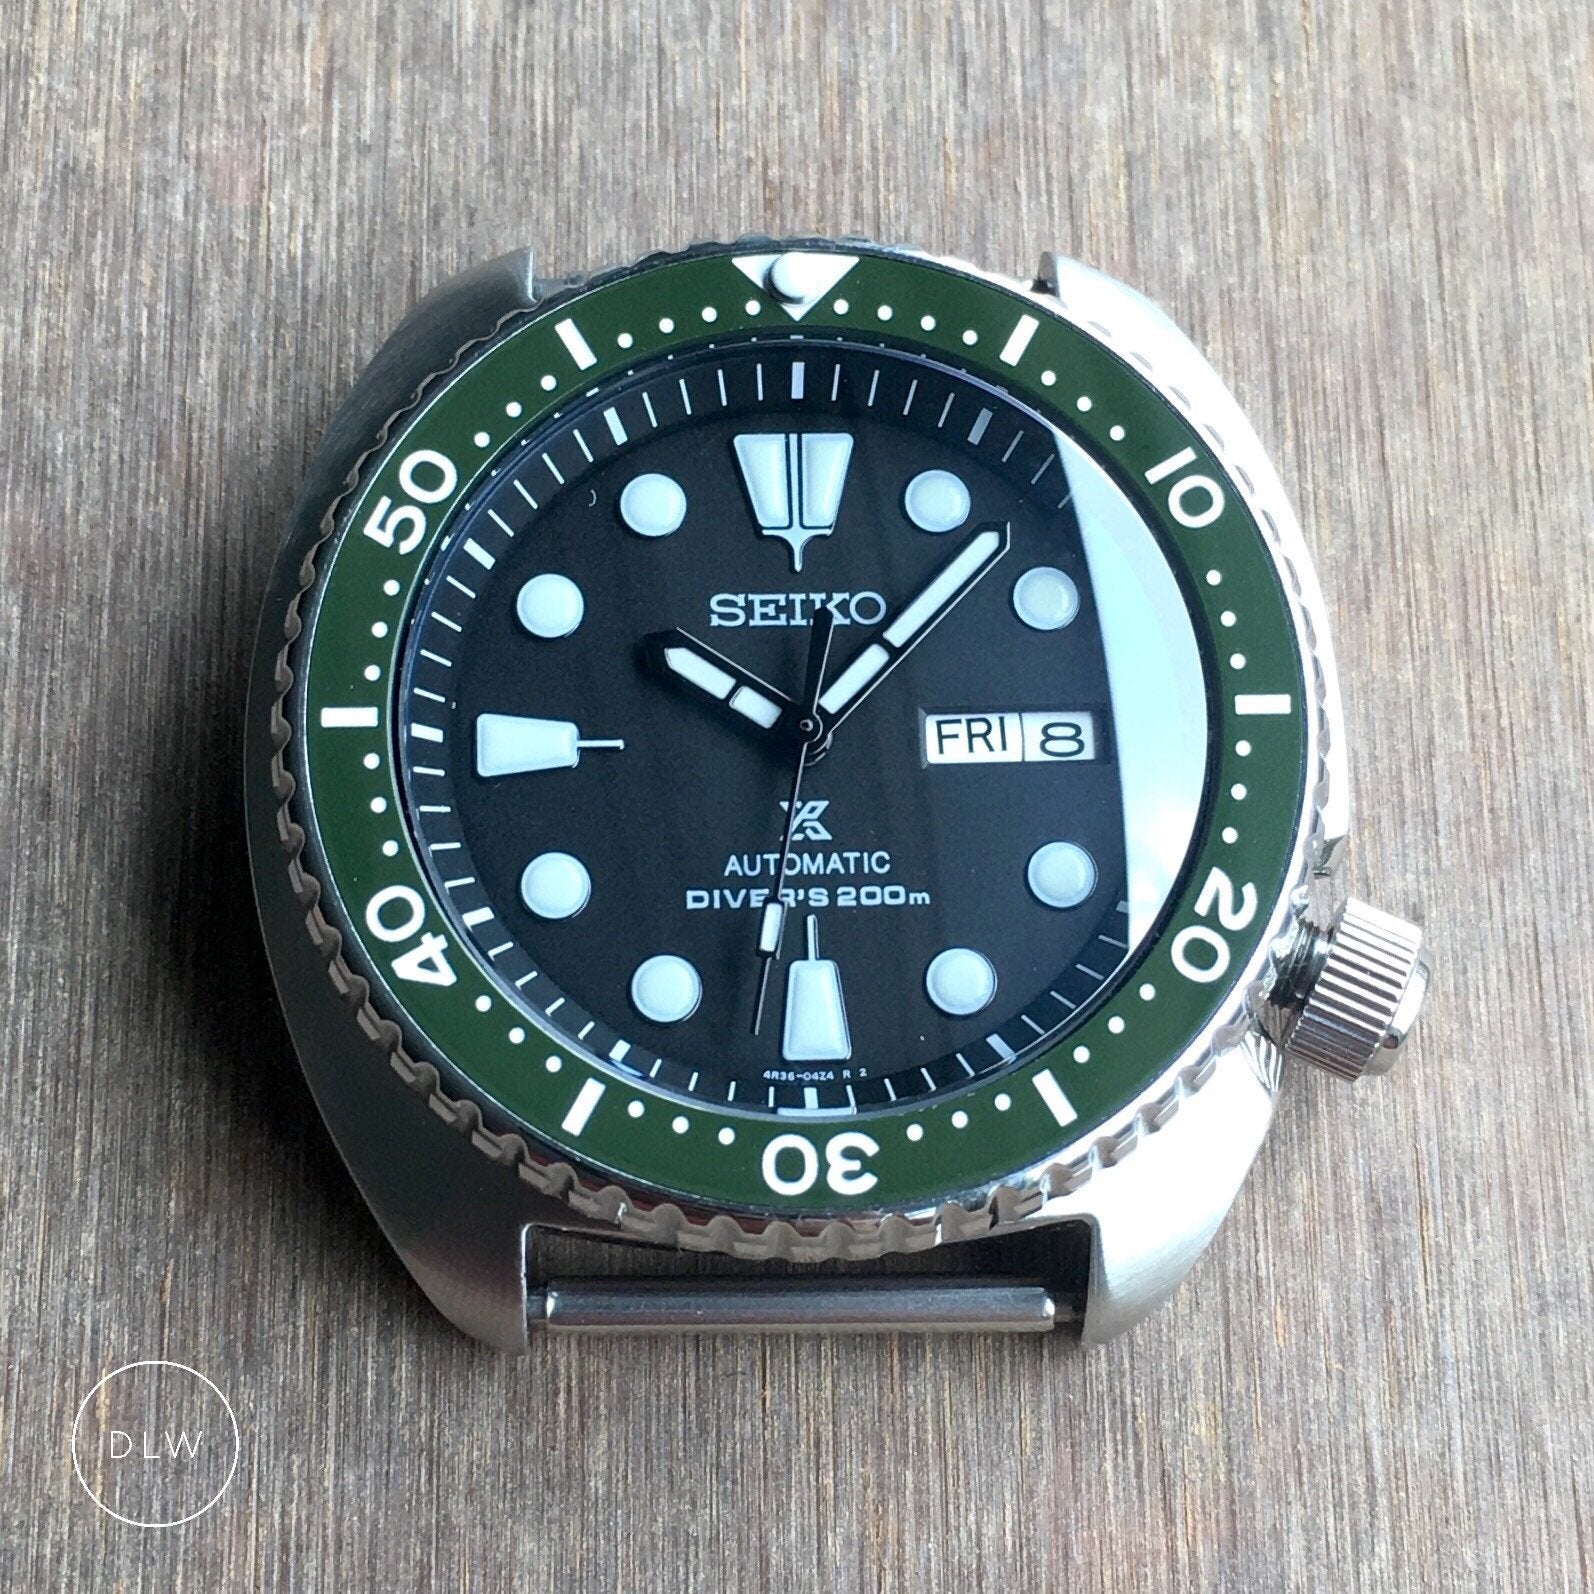 DLW Watches Seiko #SRP777 Turtle Ceramic Vintage Bezel Insert Mod • Photo  By Perseus Pang (IG @snaps_by_p2p) • Visit For More Custom Seiko Mod Parts,  Free International Shipping Facebook 